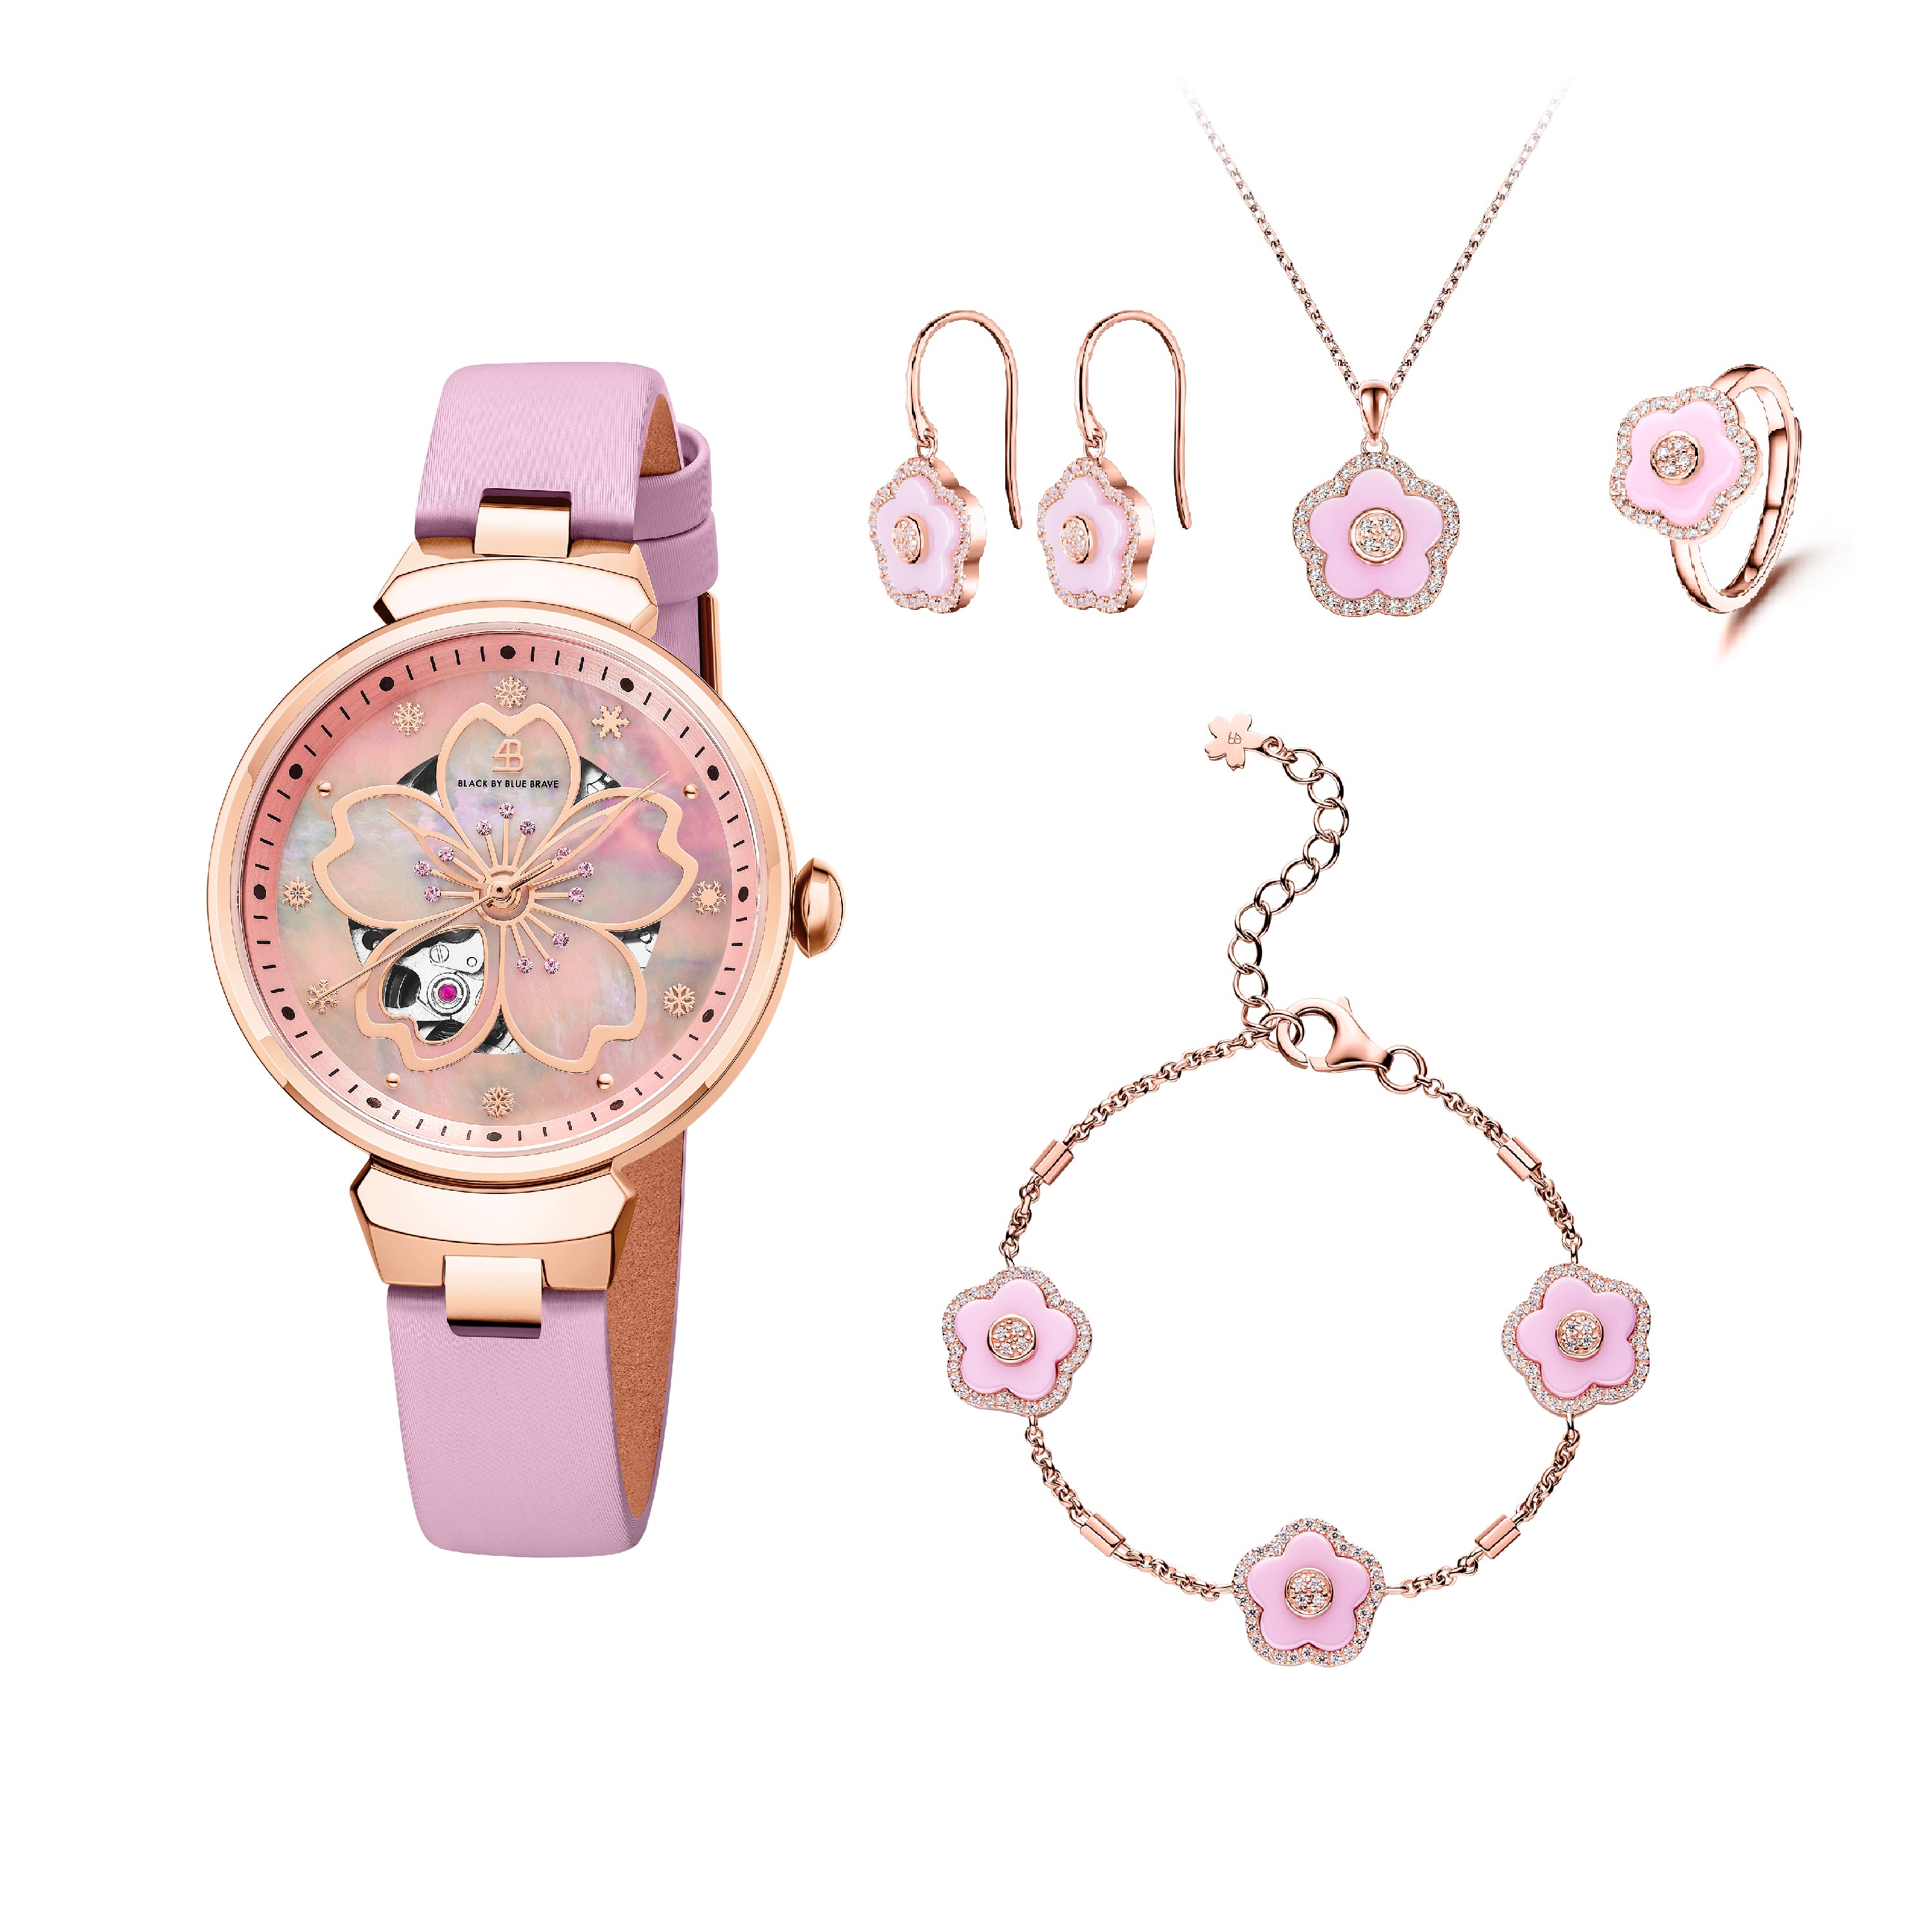 Blue Cherry Blossom 36mm Automatic Watch & Flower Ceramic  Jewelleries（Earrings & Bracelet & Necklace & Ring）